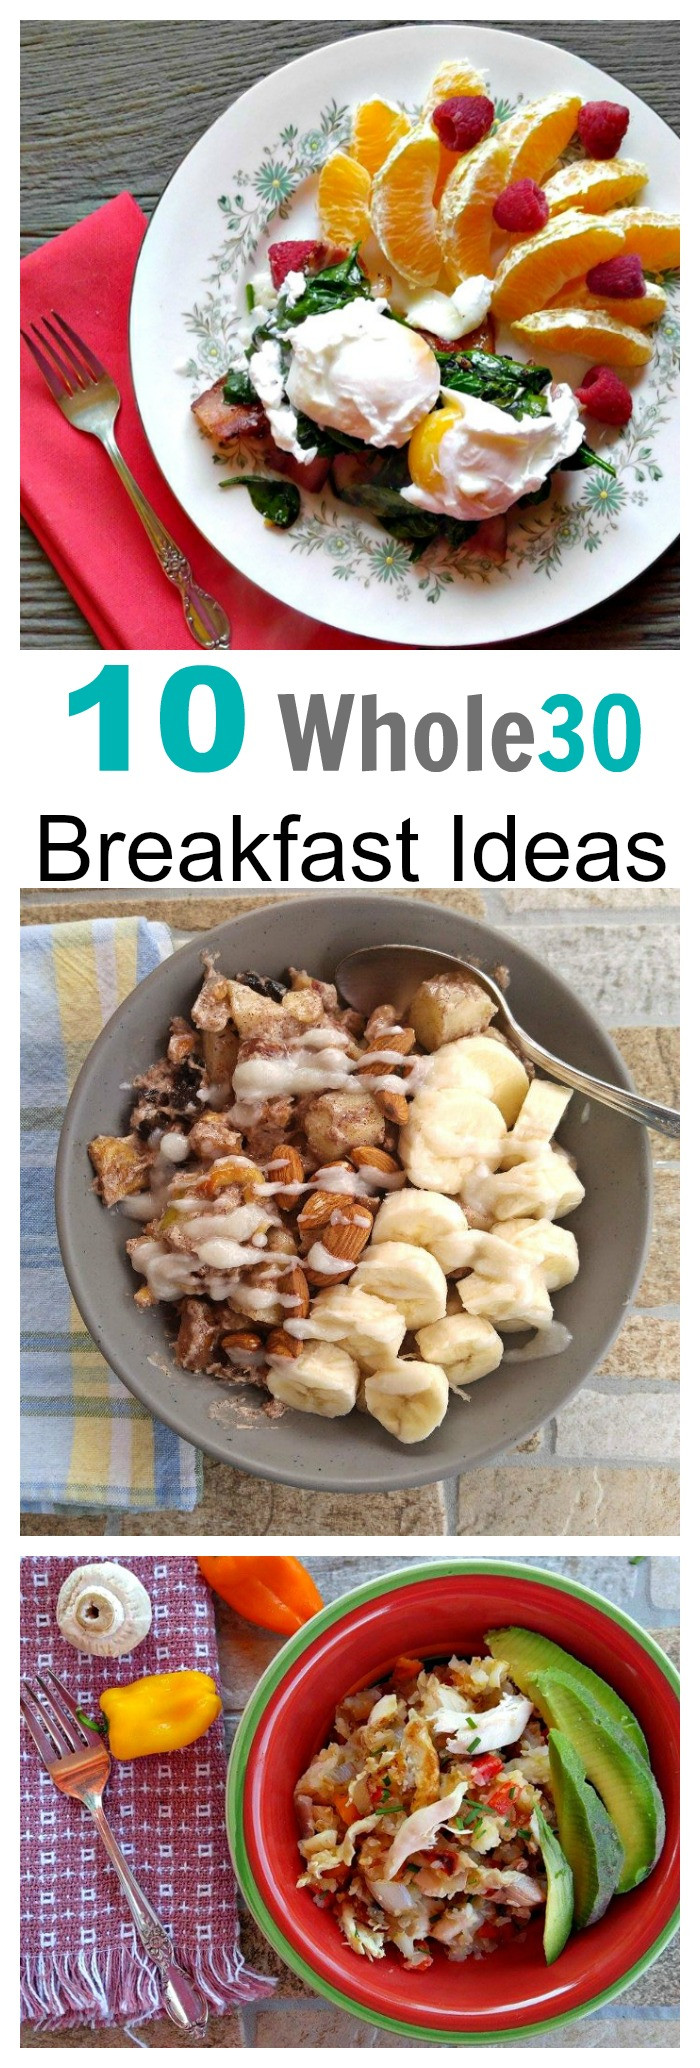 Whole30 Brunch Recipes
 Whole30 Breakfast Recipes Easy Paleo Ideas to Start your